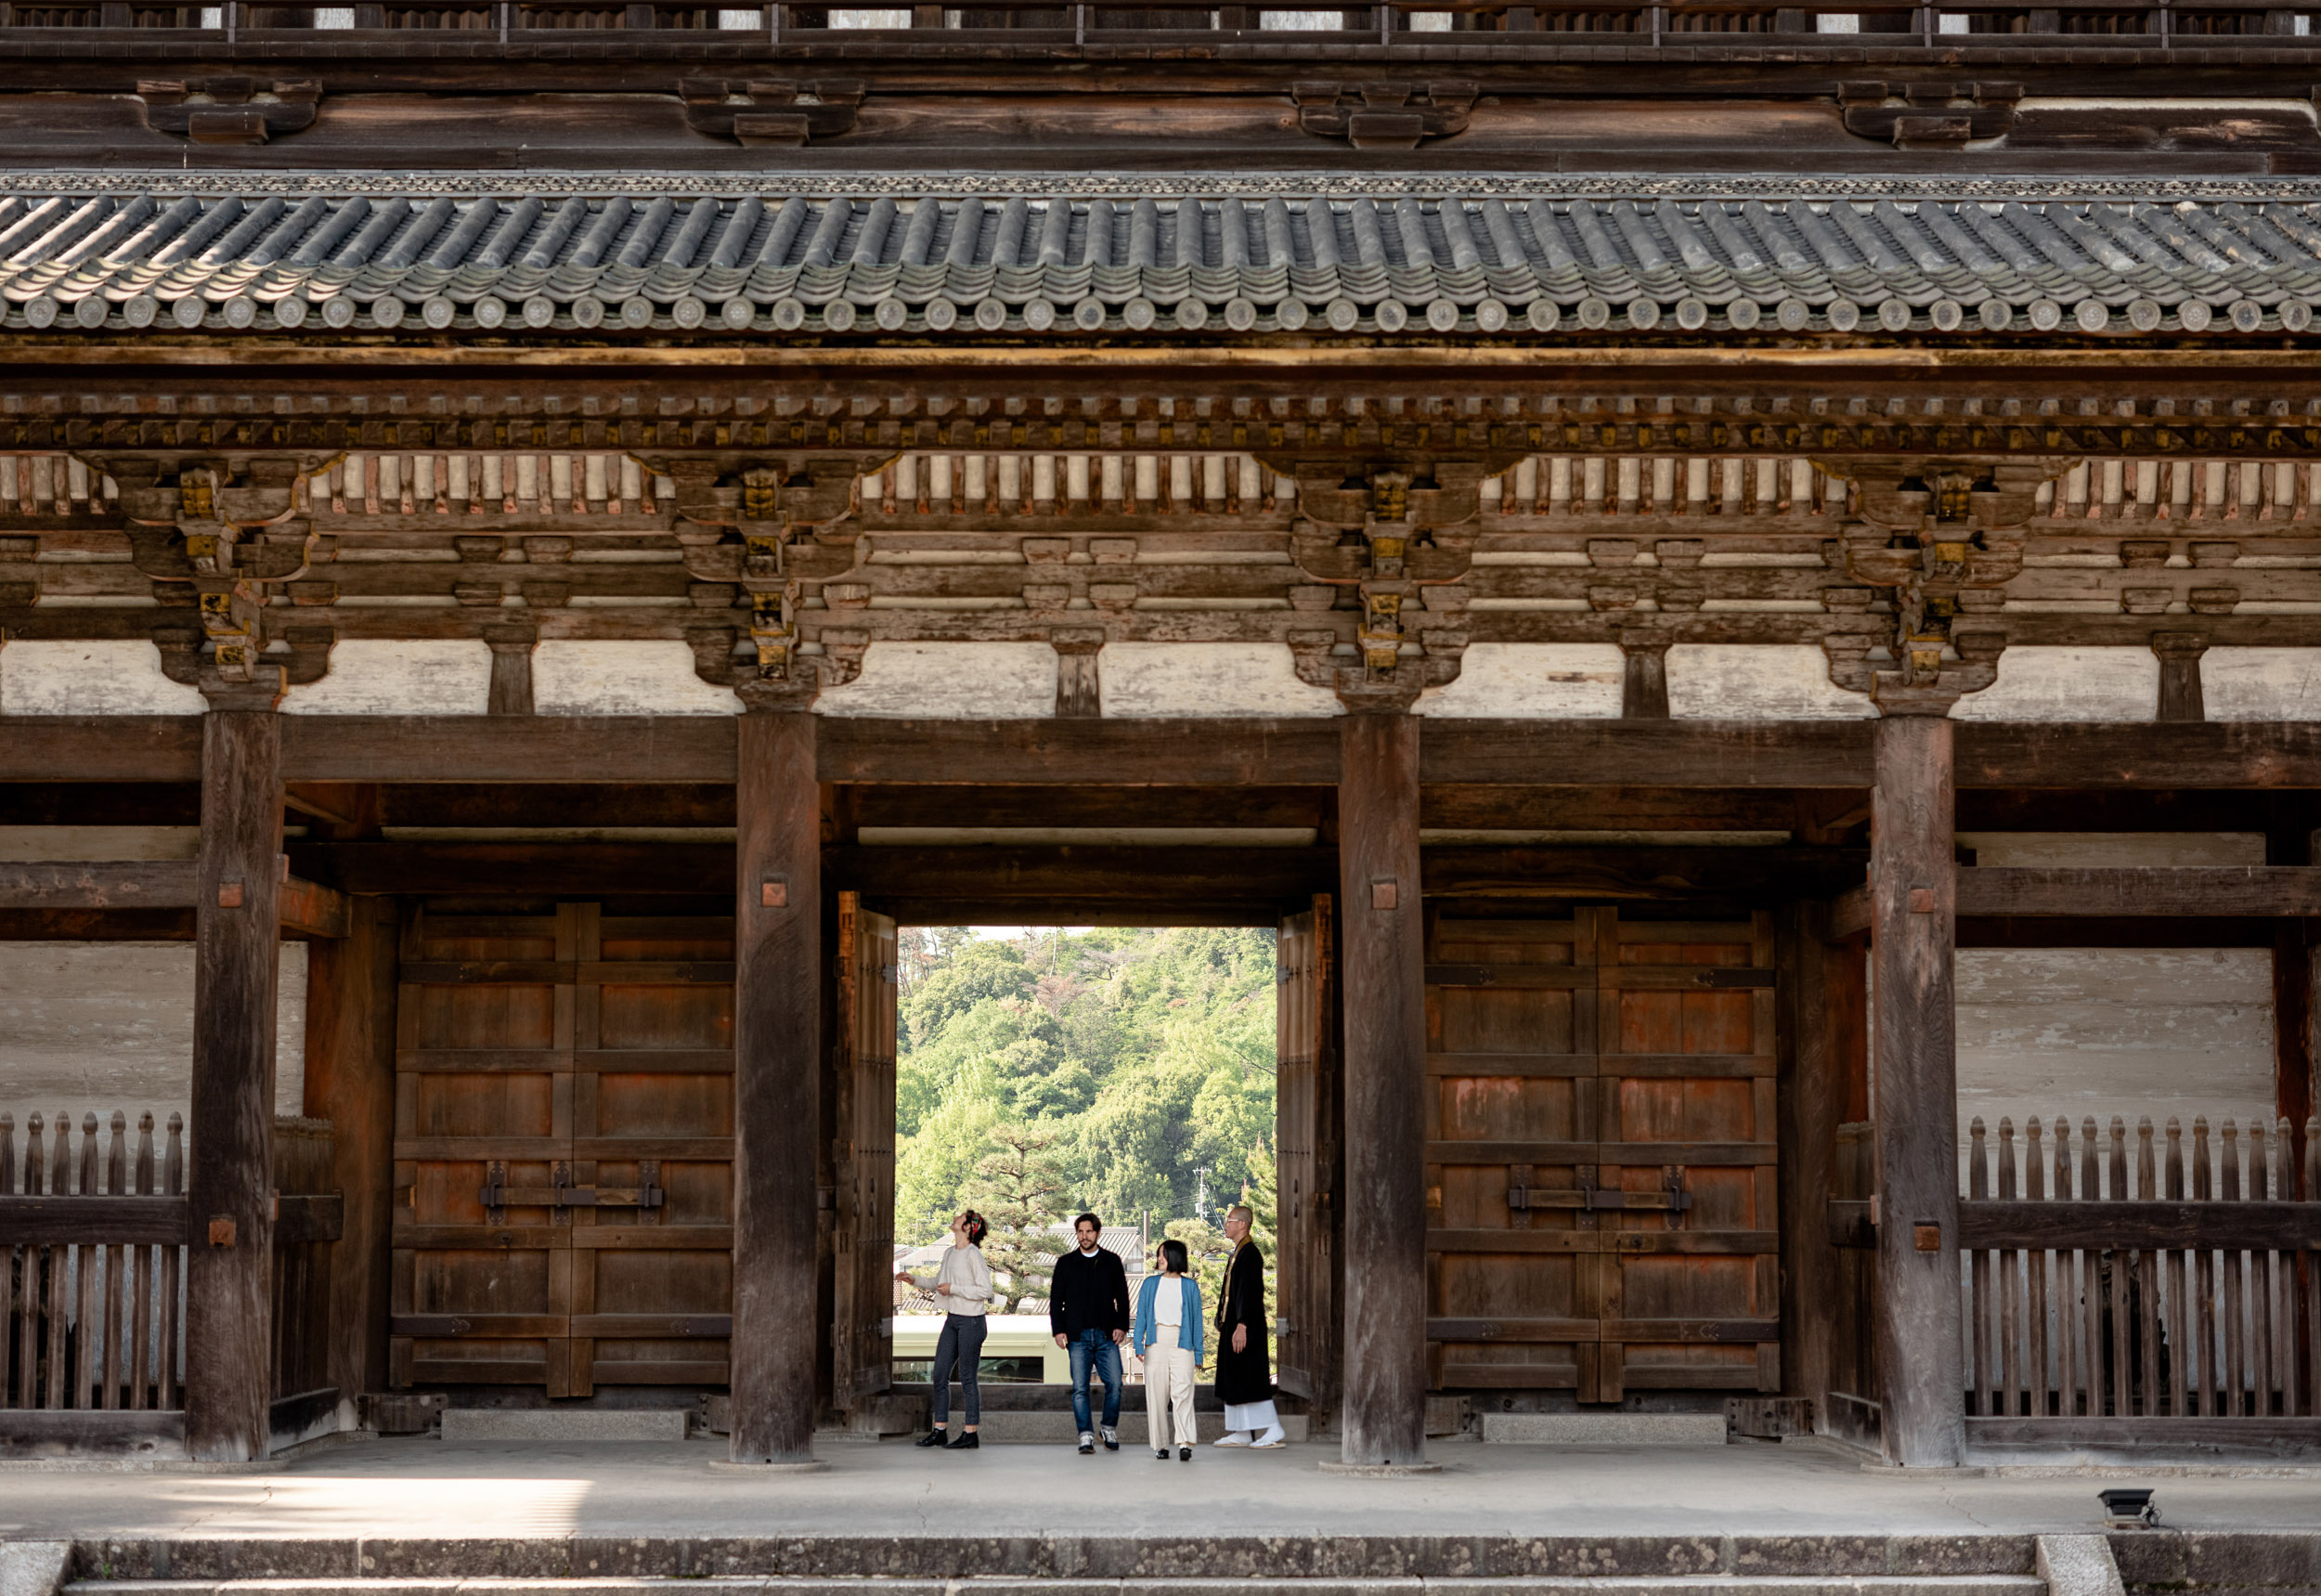 Discovering Japanese culture in Kyoto